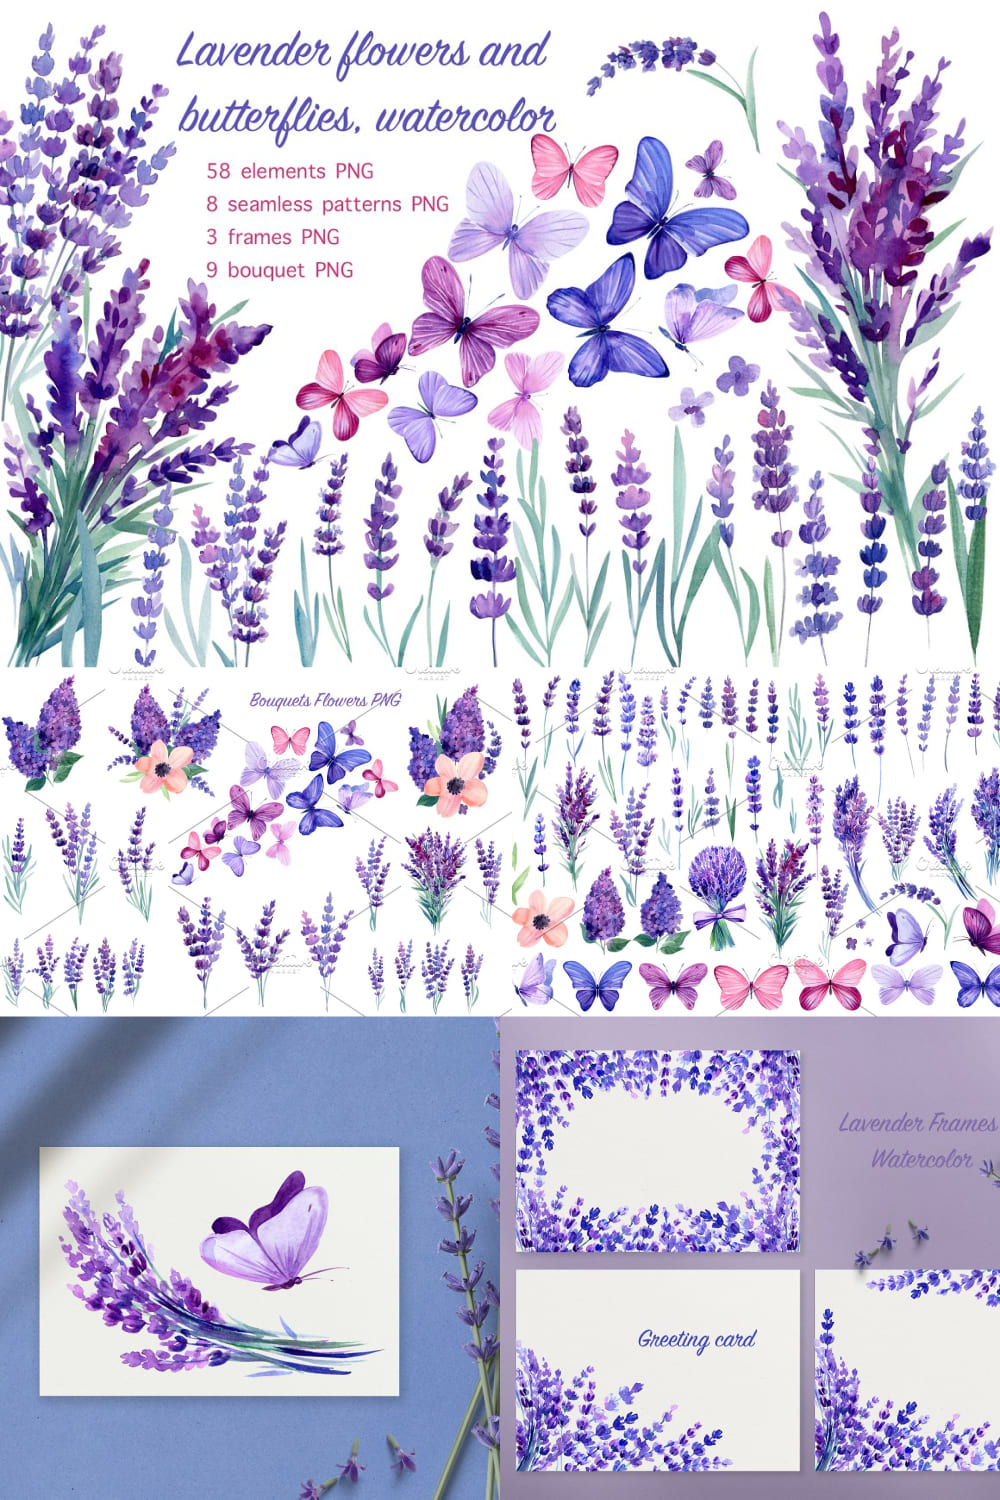 Lavender Flowers And Butterflies pinterest image.